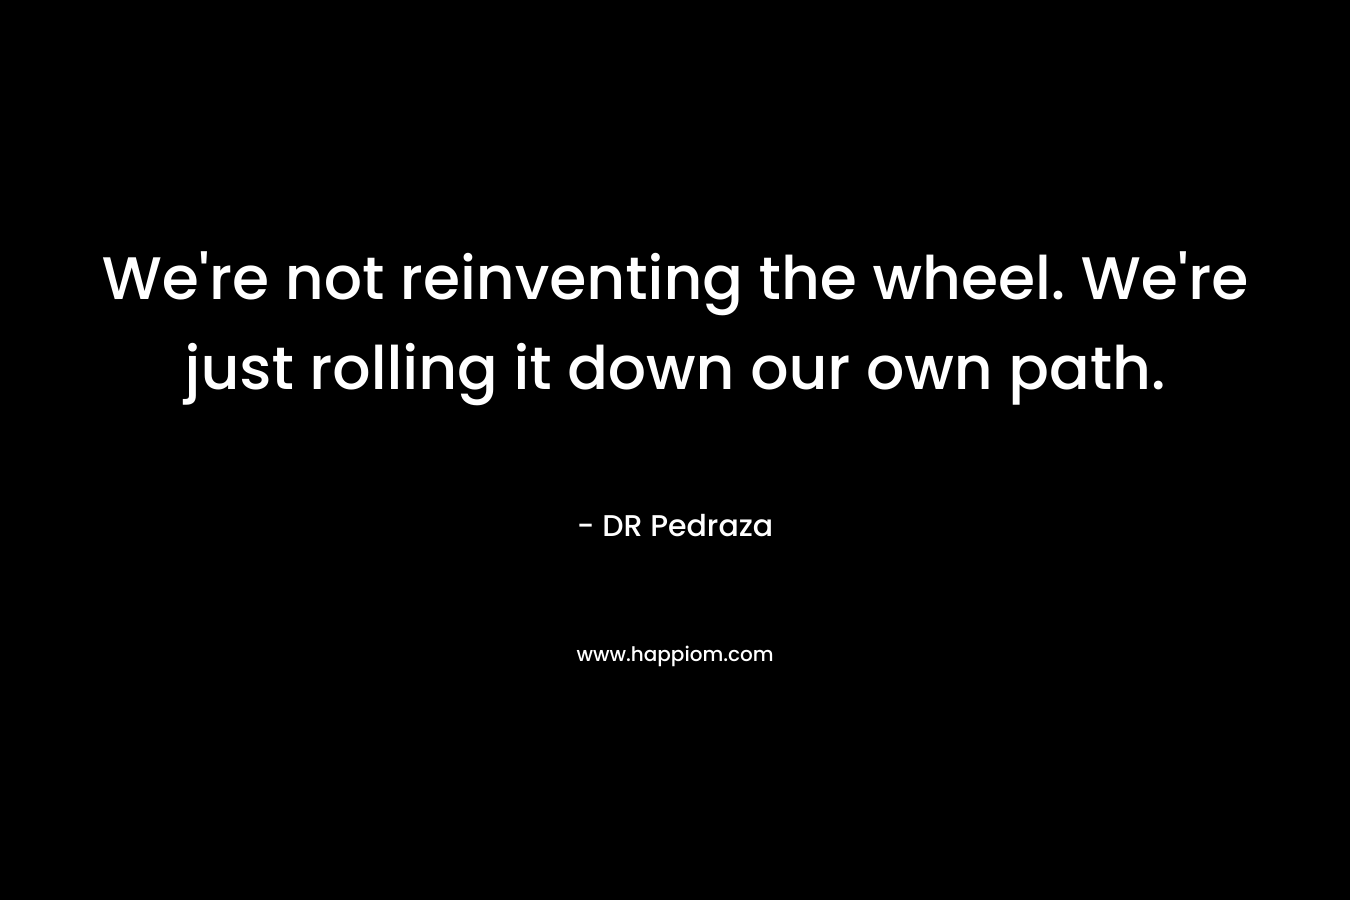 We're not reinventing the wheel. We're just rolling it down our own path.